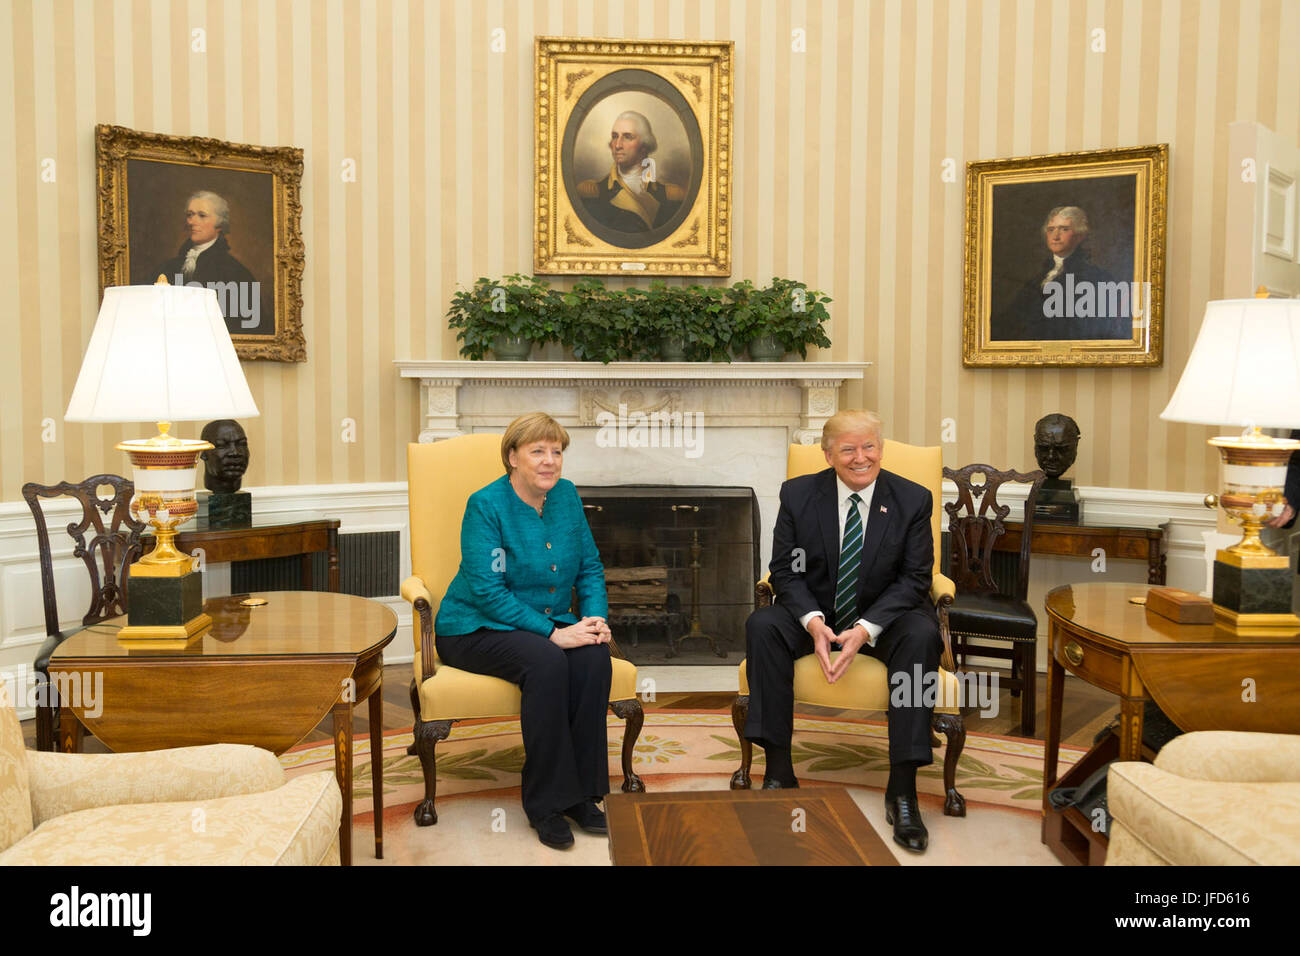 President Donald Trump meets with German Chancellor Angela Merkel, Friday, March 17, 2017, in the Oval Office of the White House in Washington, D.C. Stock Photo